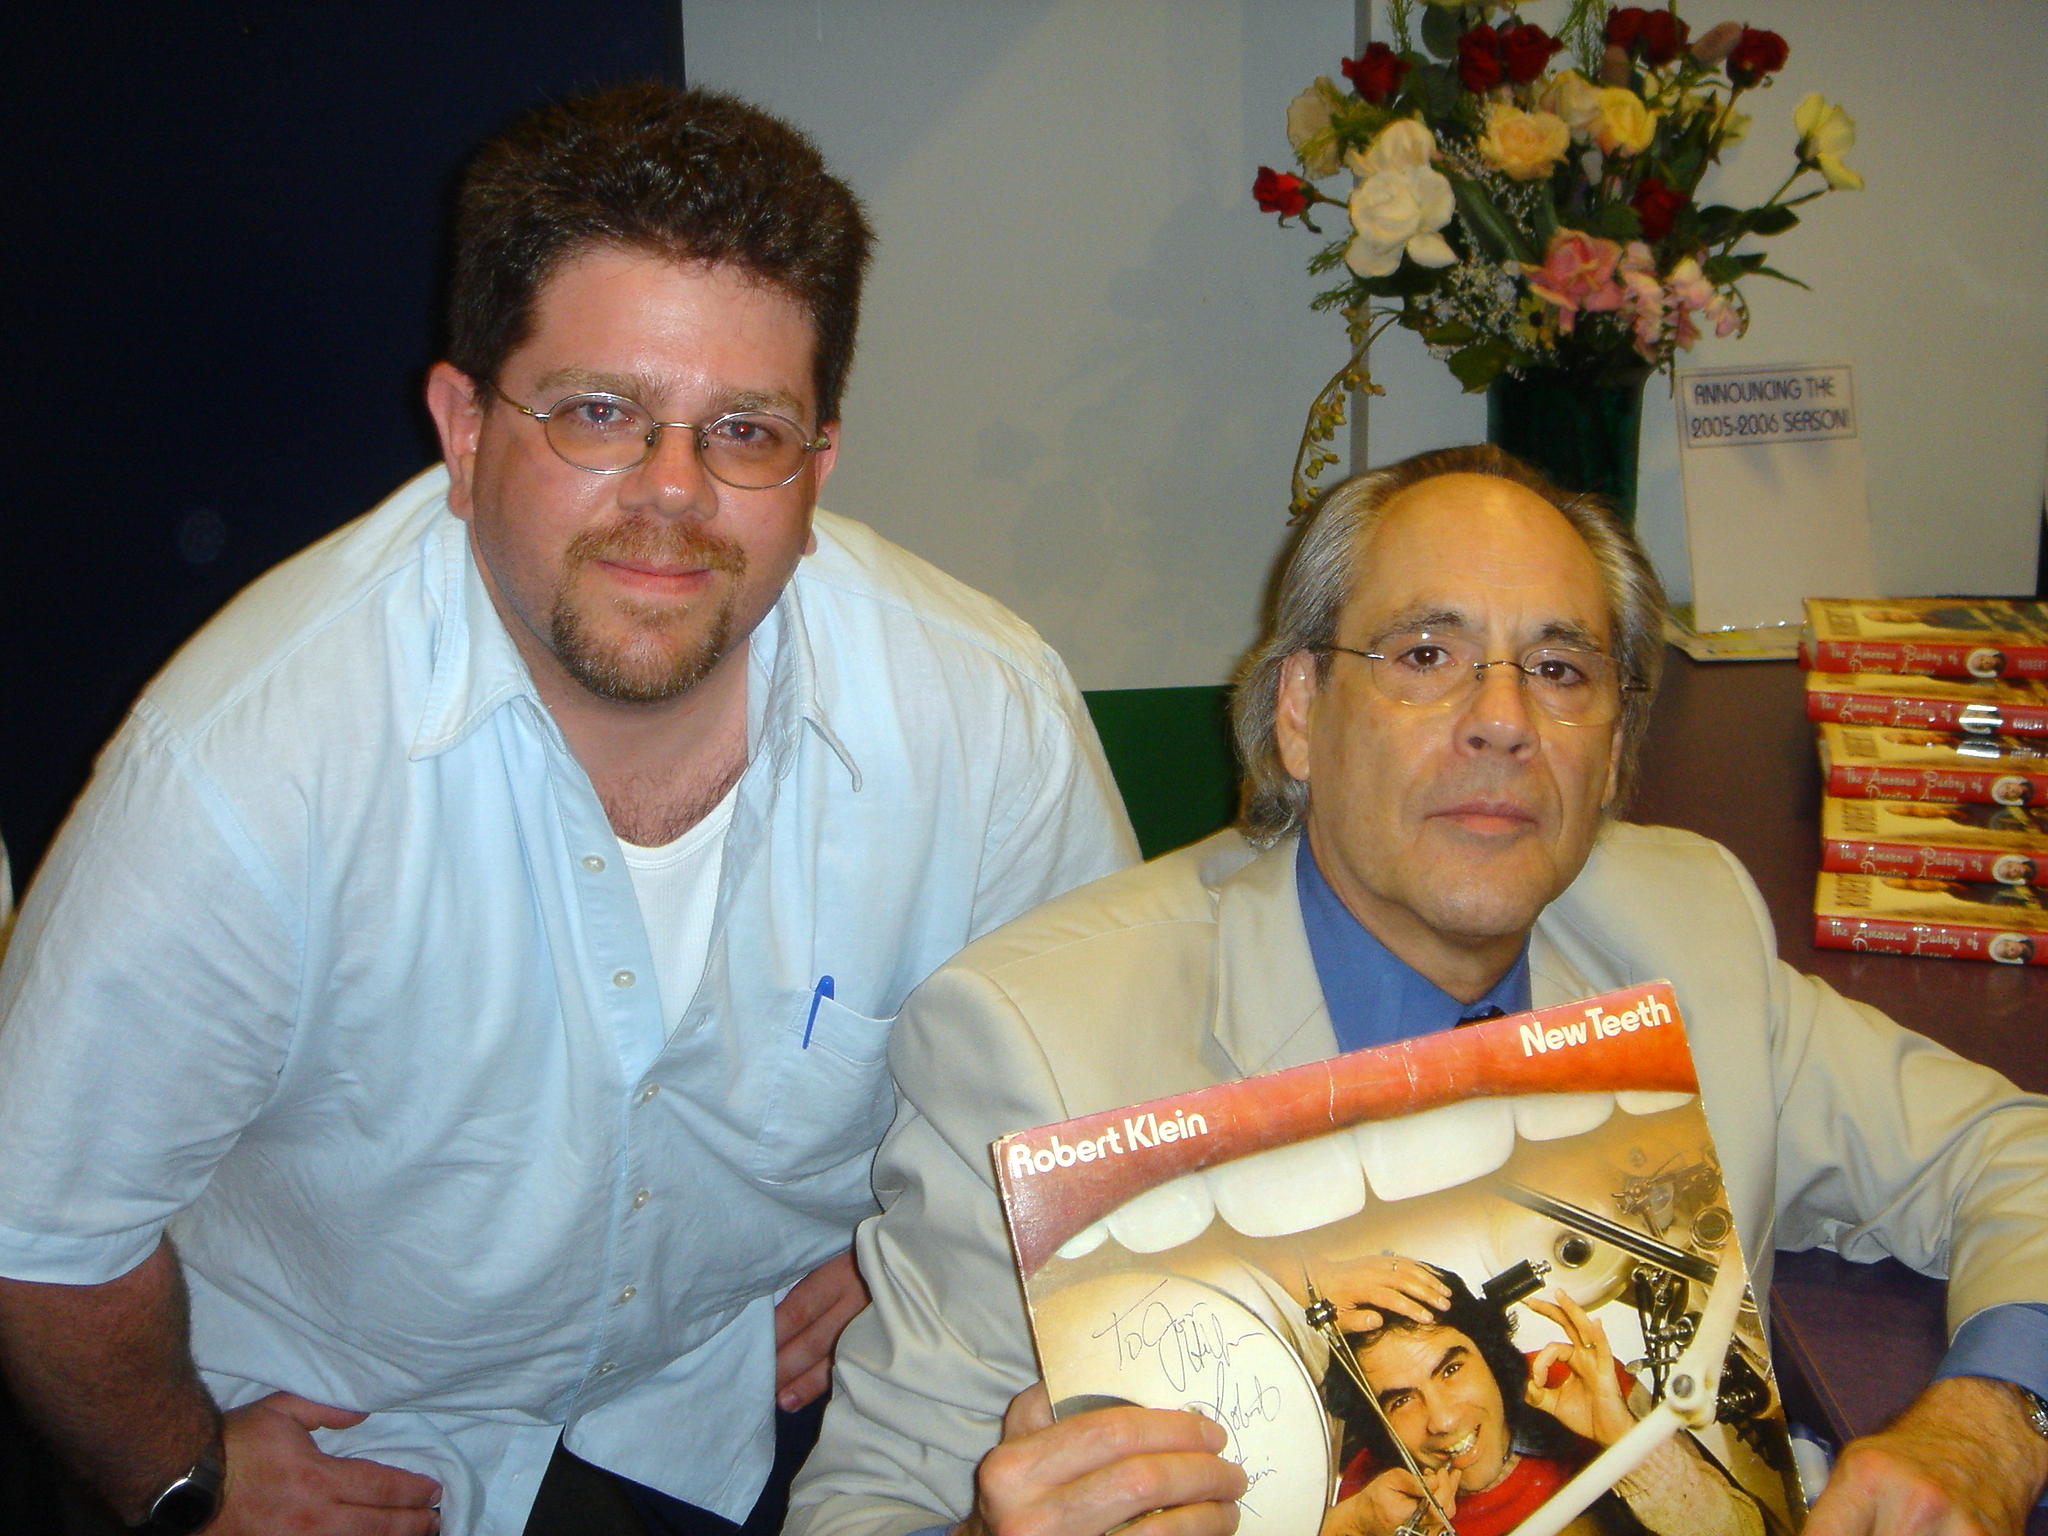 Comedy legend Robert Klein and I in Westchester, NY